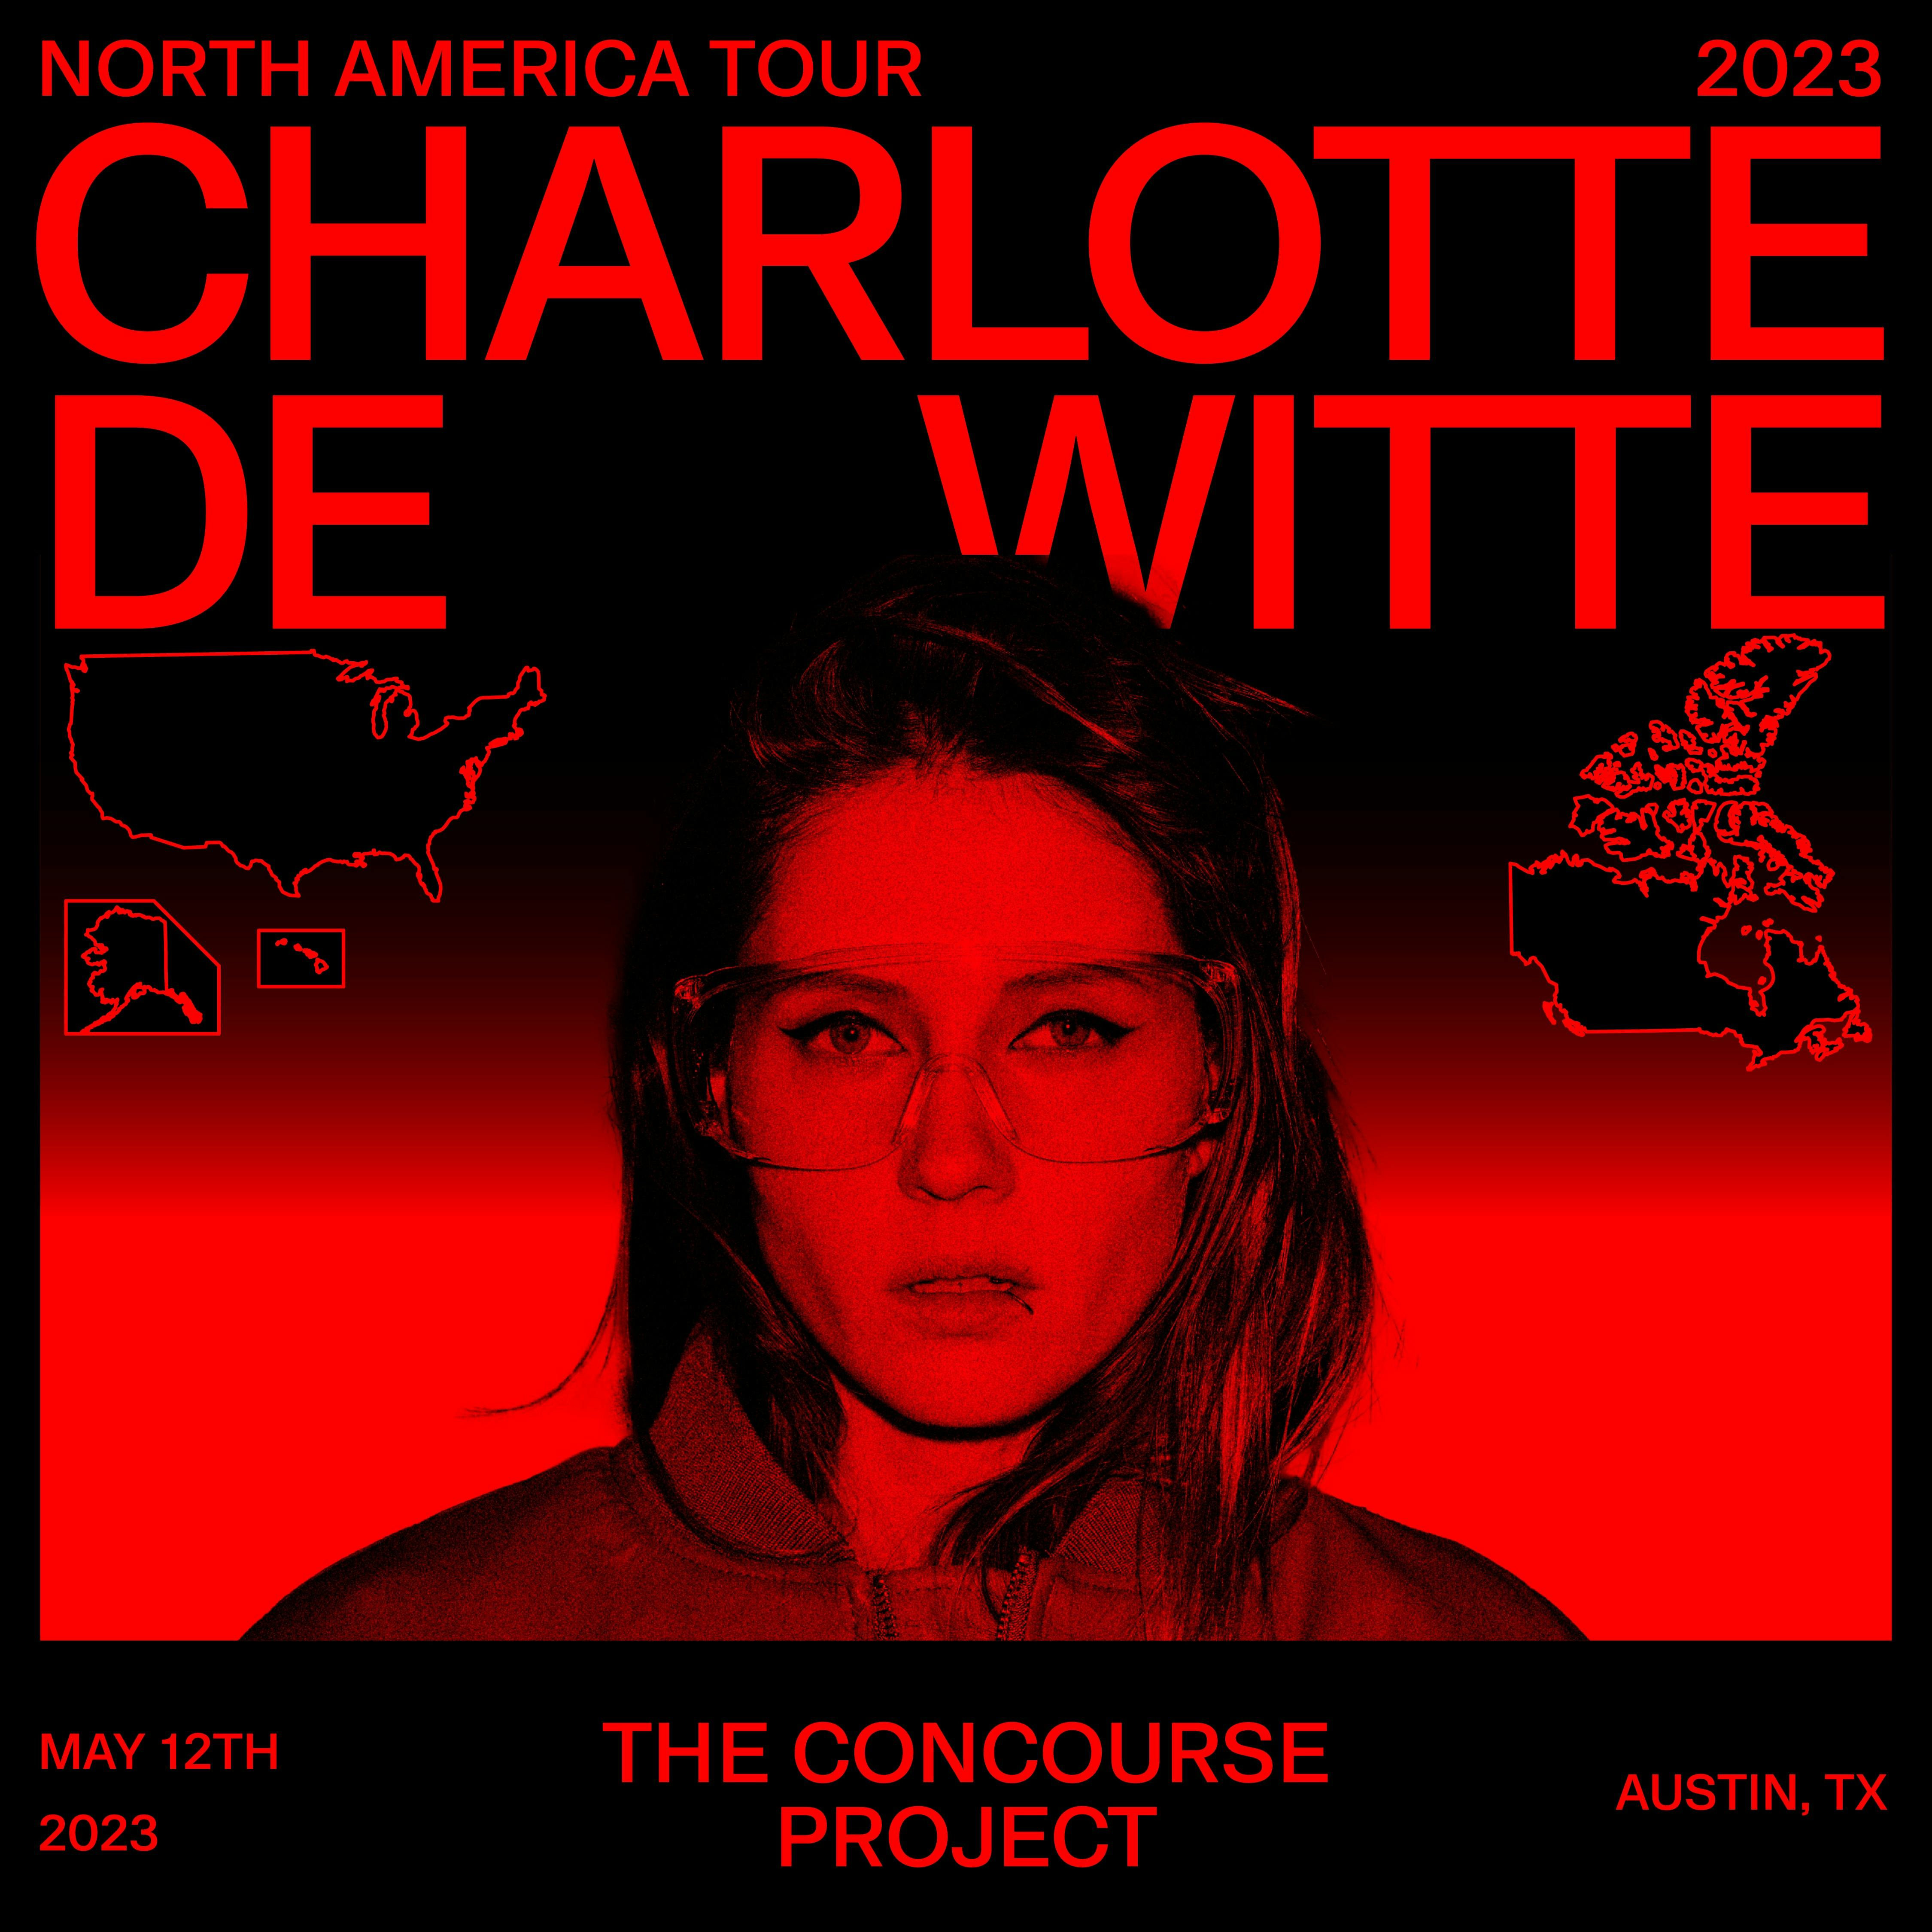 Charlotte de Witte at The Concourse Project Friday, May 12 2023